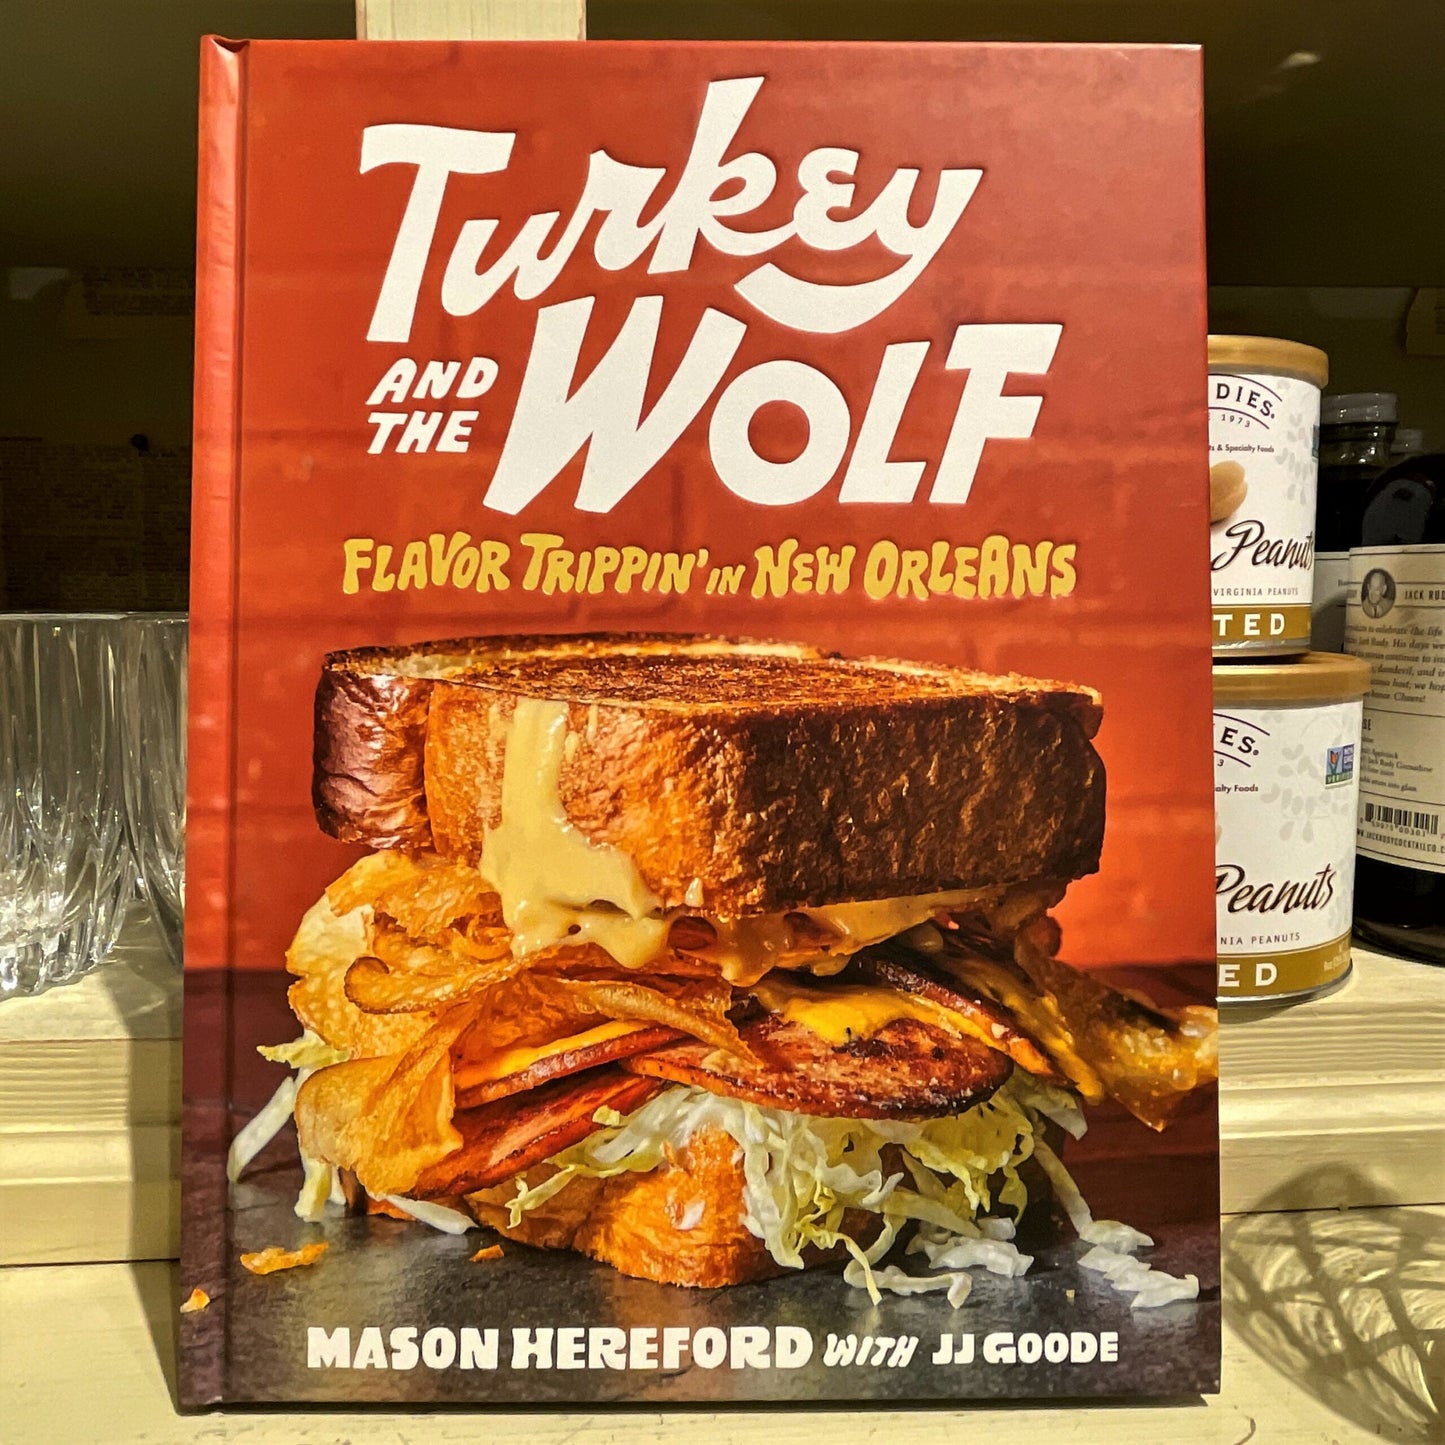 Turkey and the Wolf, Flavor Trippin' in New Orleans